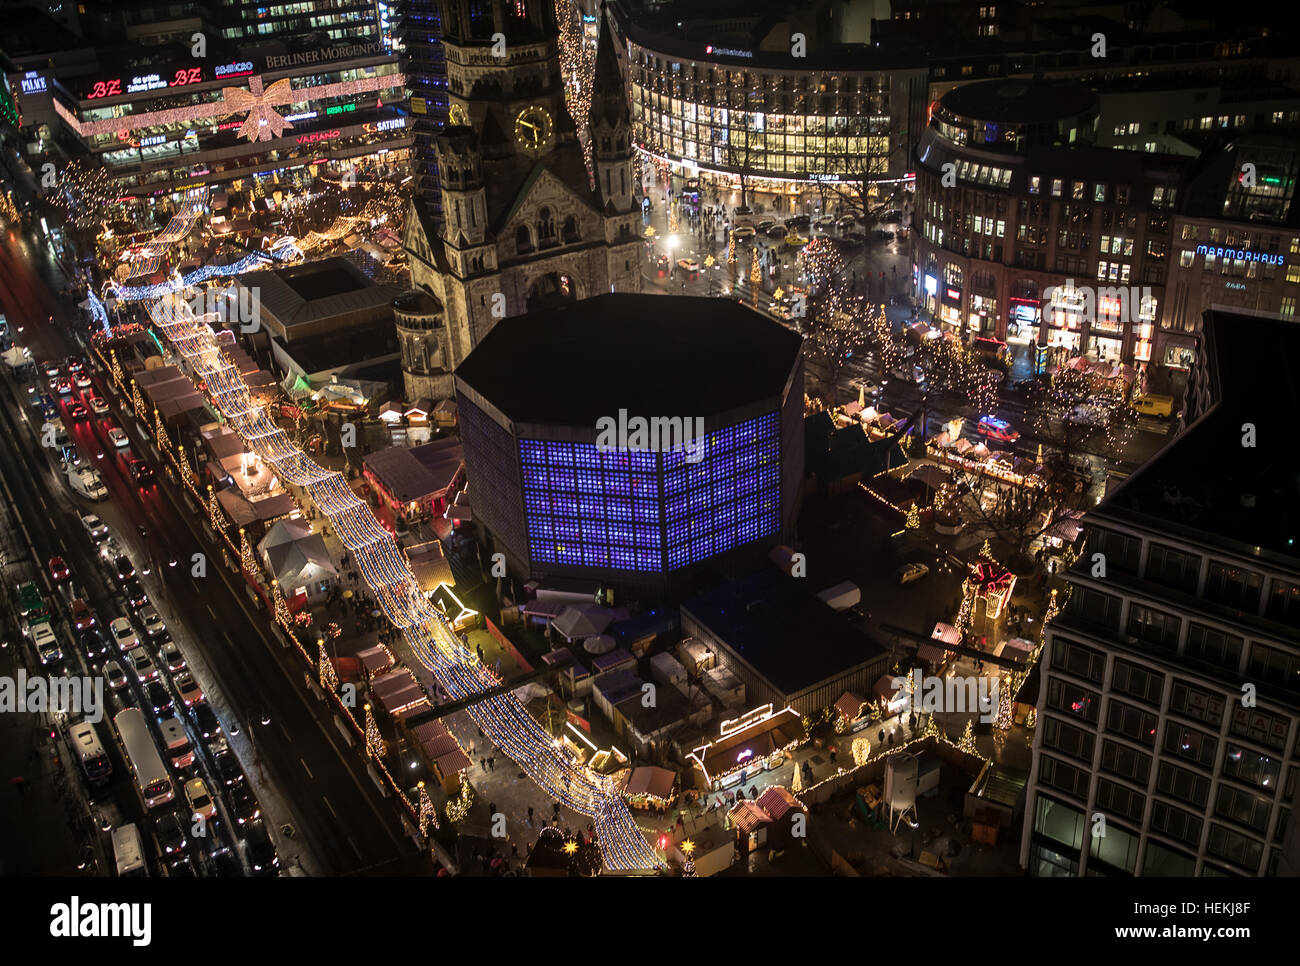 Berlin, Germany. 22nd Dec, 2016. View of the Christmas market on Breitscheidplatz square in Berlin, Germany, 22 December 2016. On Monday 19 December an unknown person drove a truck into a Christmas market by the Memorial Church. At least twelve people were killed and around 50 injured. Photo: Michael Kappeler/dpa/Alamy Live News Stock Photo